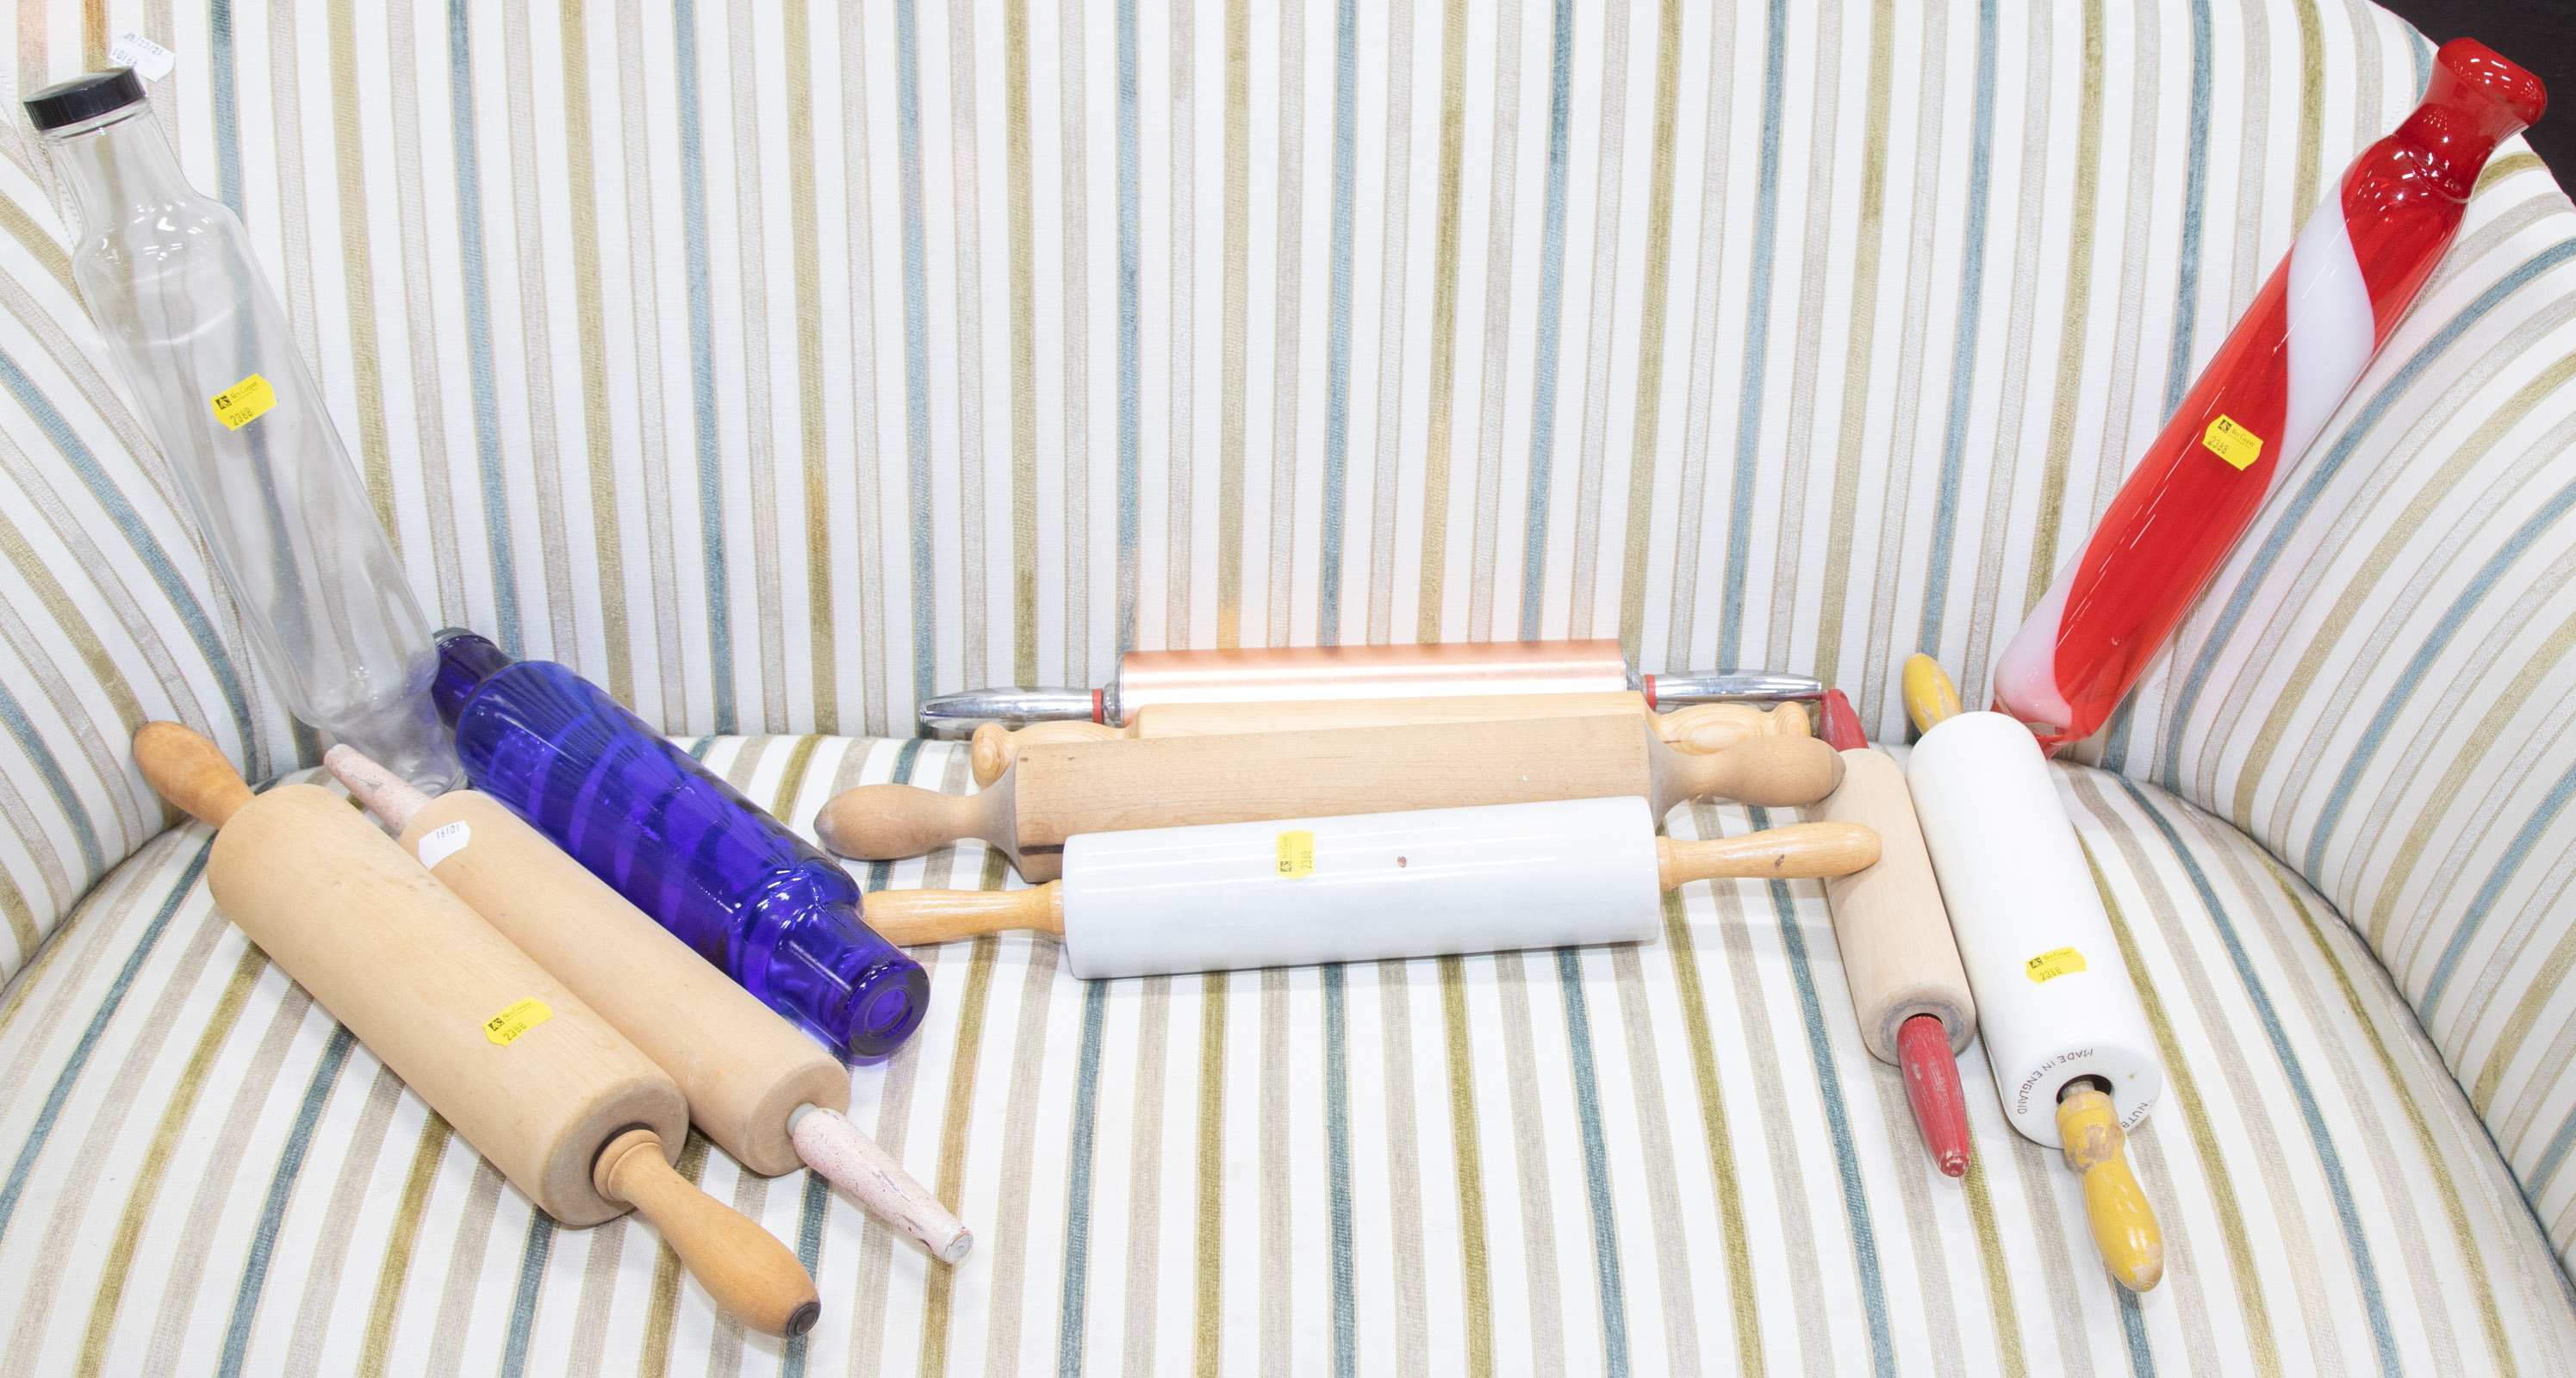 COLLECTION OF ELEVEN ROLLING PINS